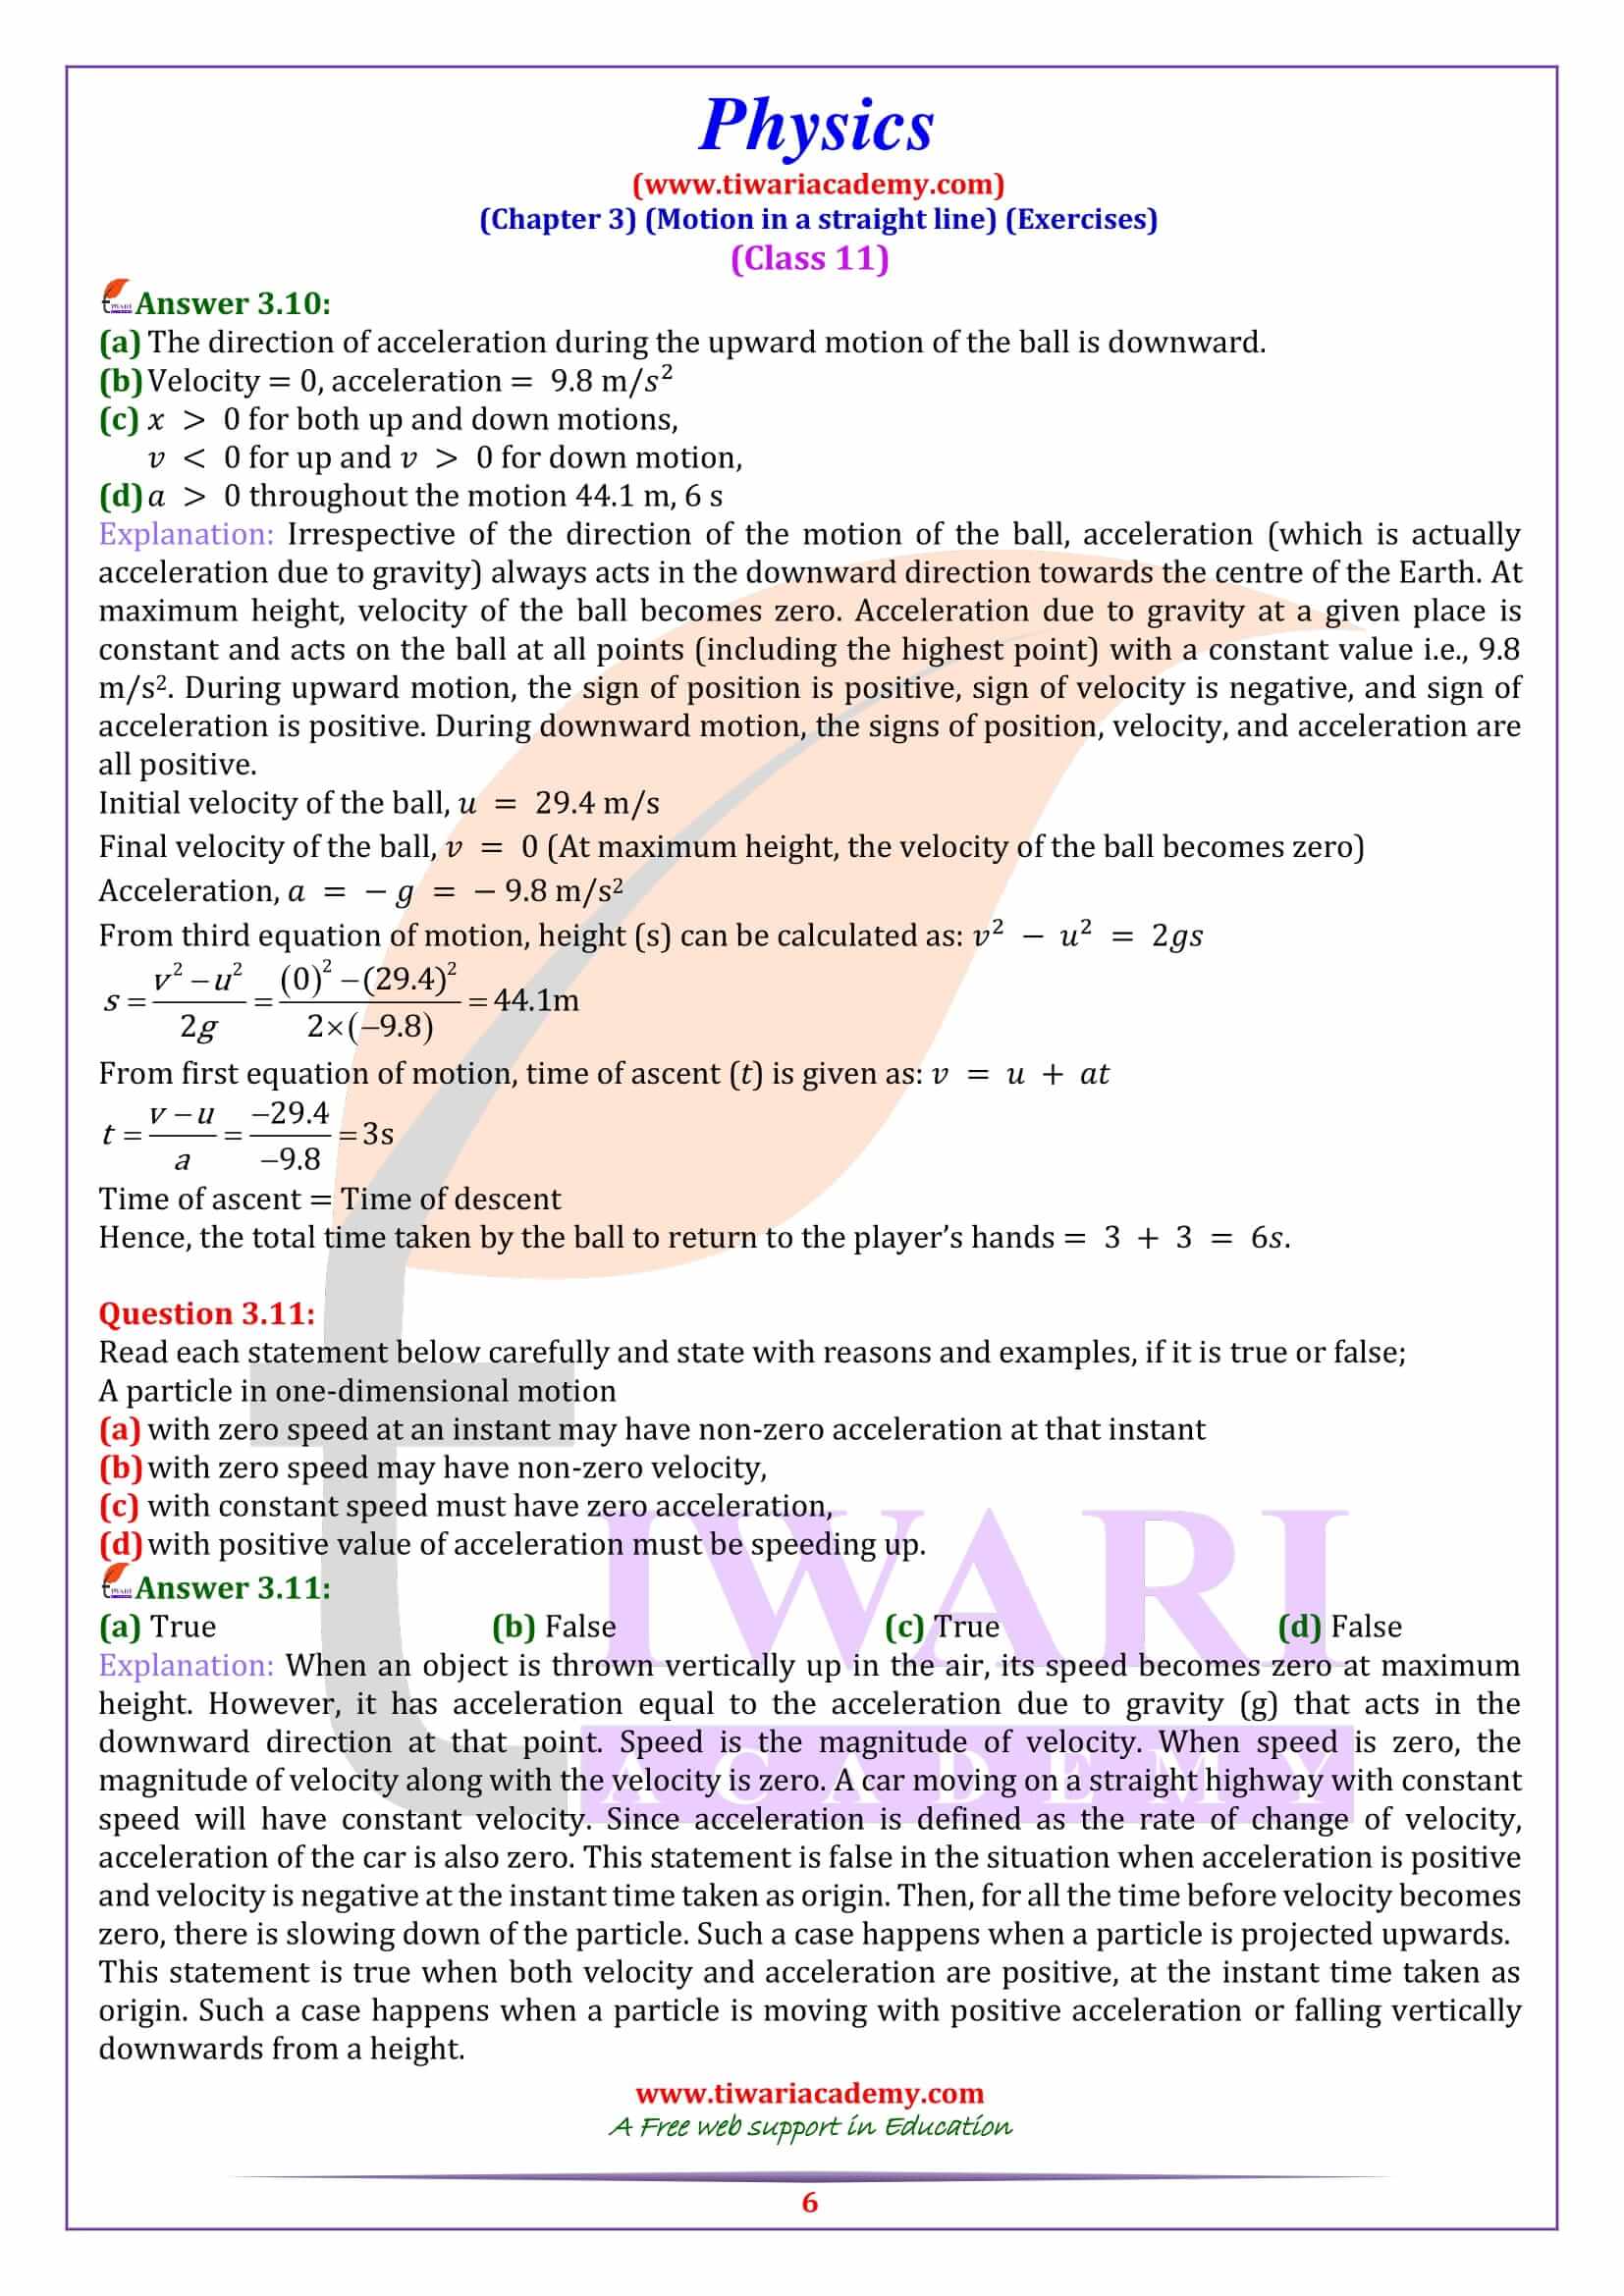 NCERT Solutions for Class 11 Physics Chapter 3 English Medium PDF